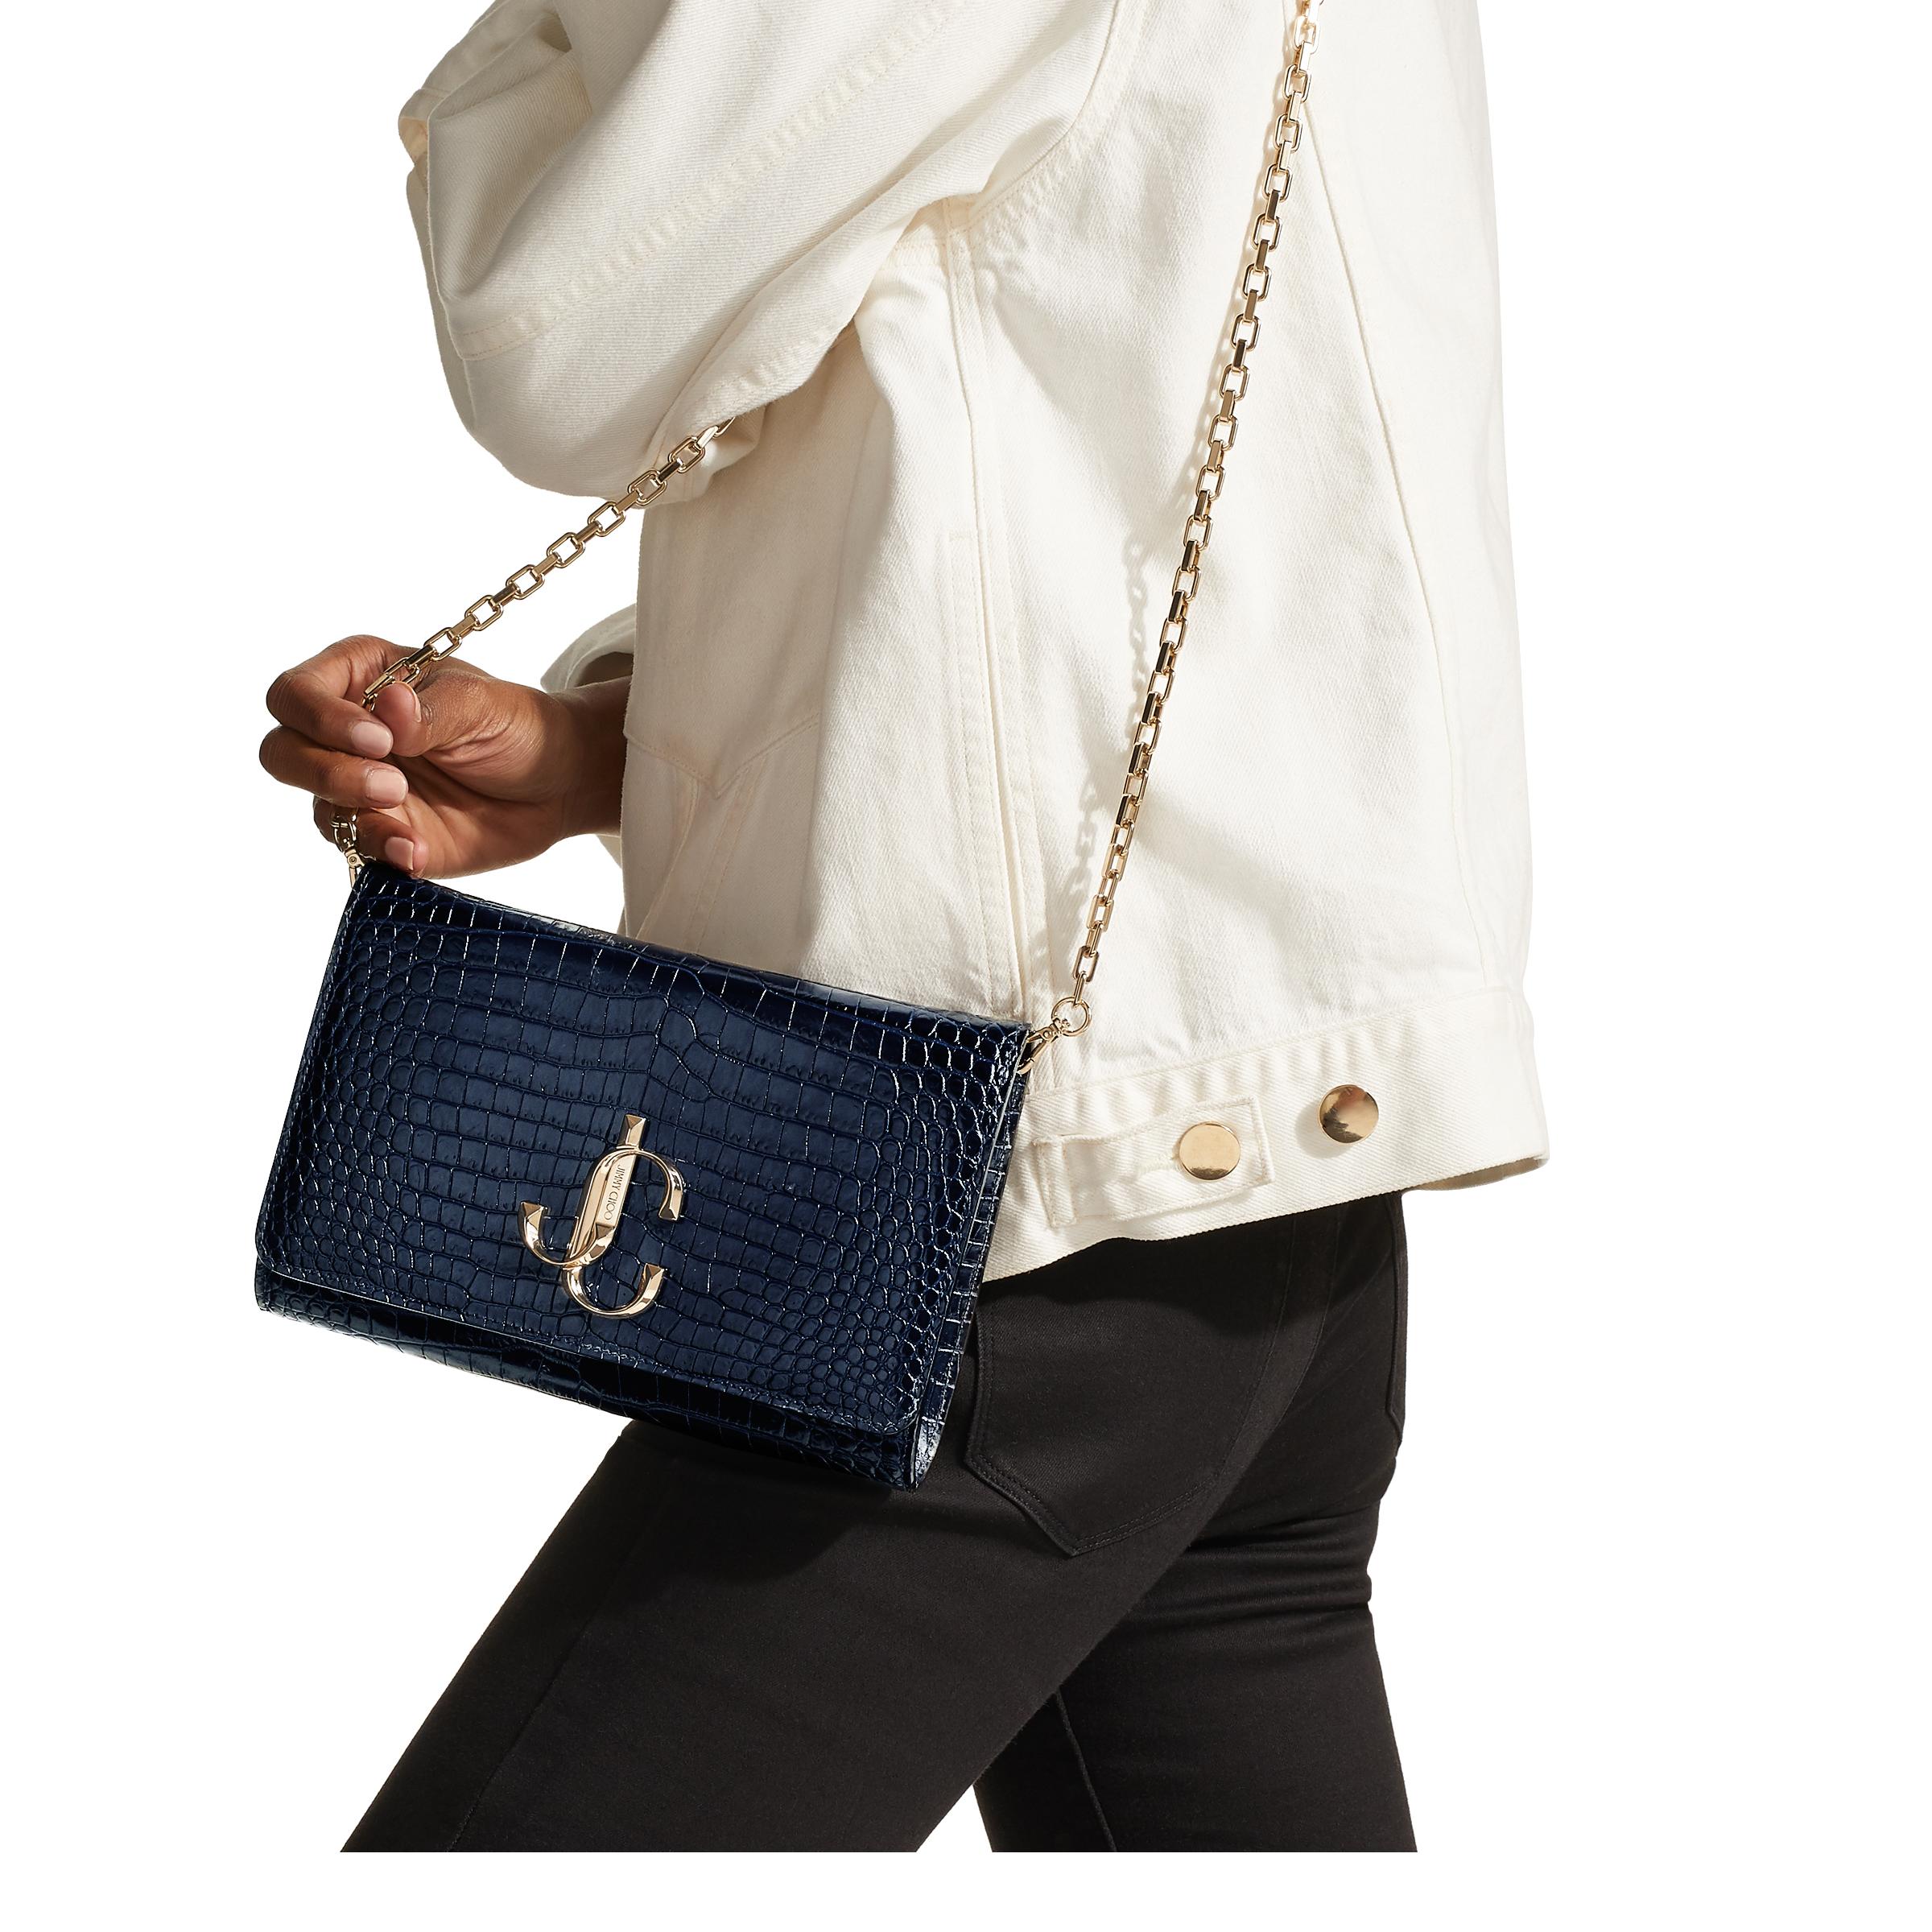 Jimmy Choo Varenne Clutch Navy Croc Embossed Leather Clutch Bag With Jc  Logo in Blue | Lyst